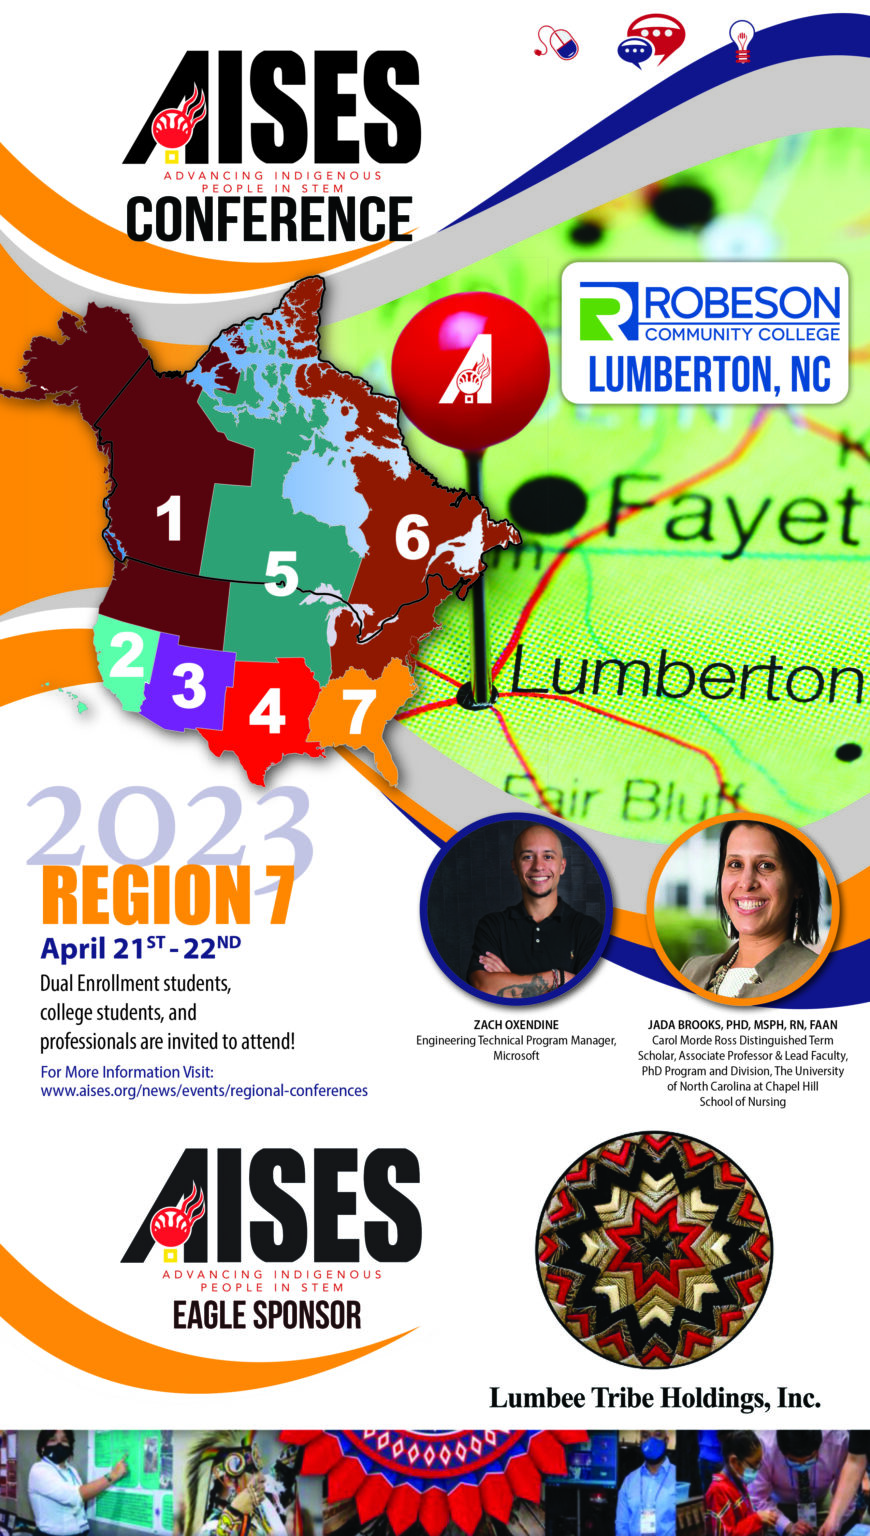 AISES Conference to include free powwow, drone & robot show Robeson